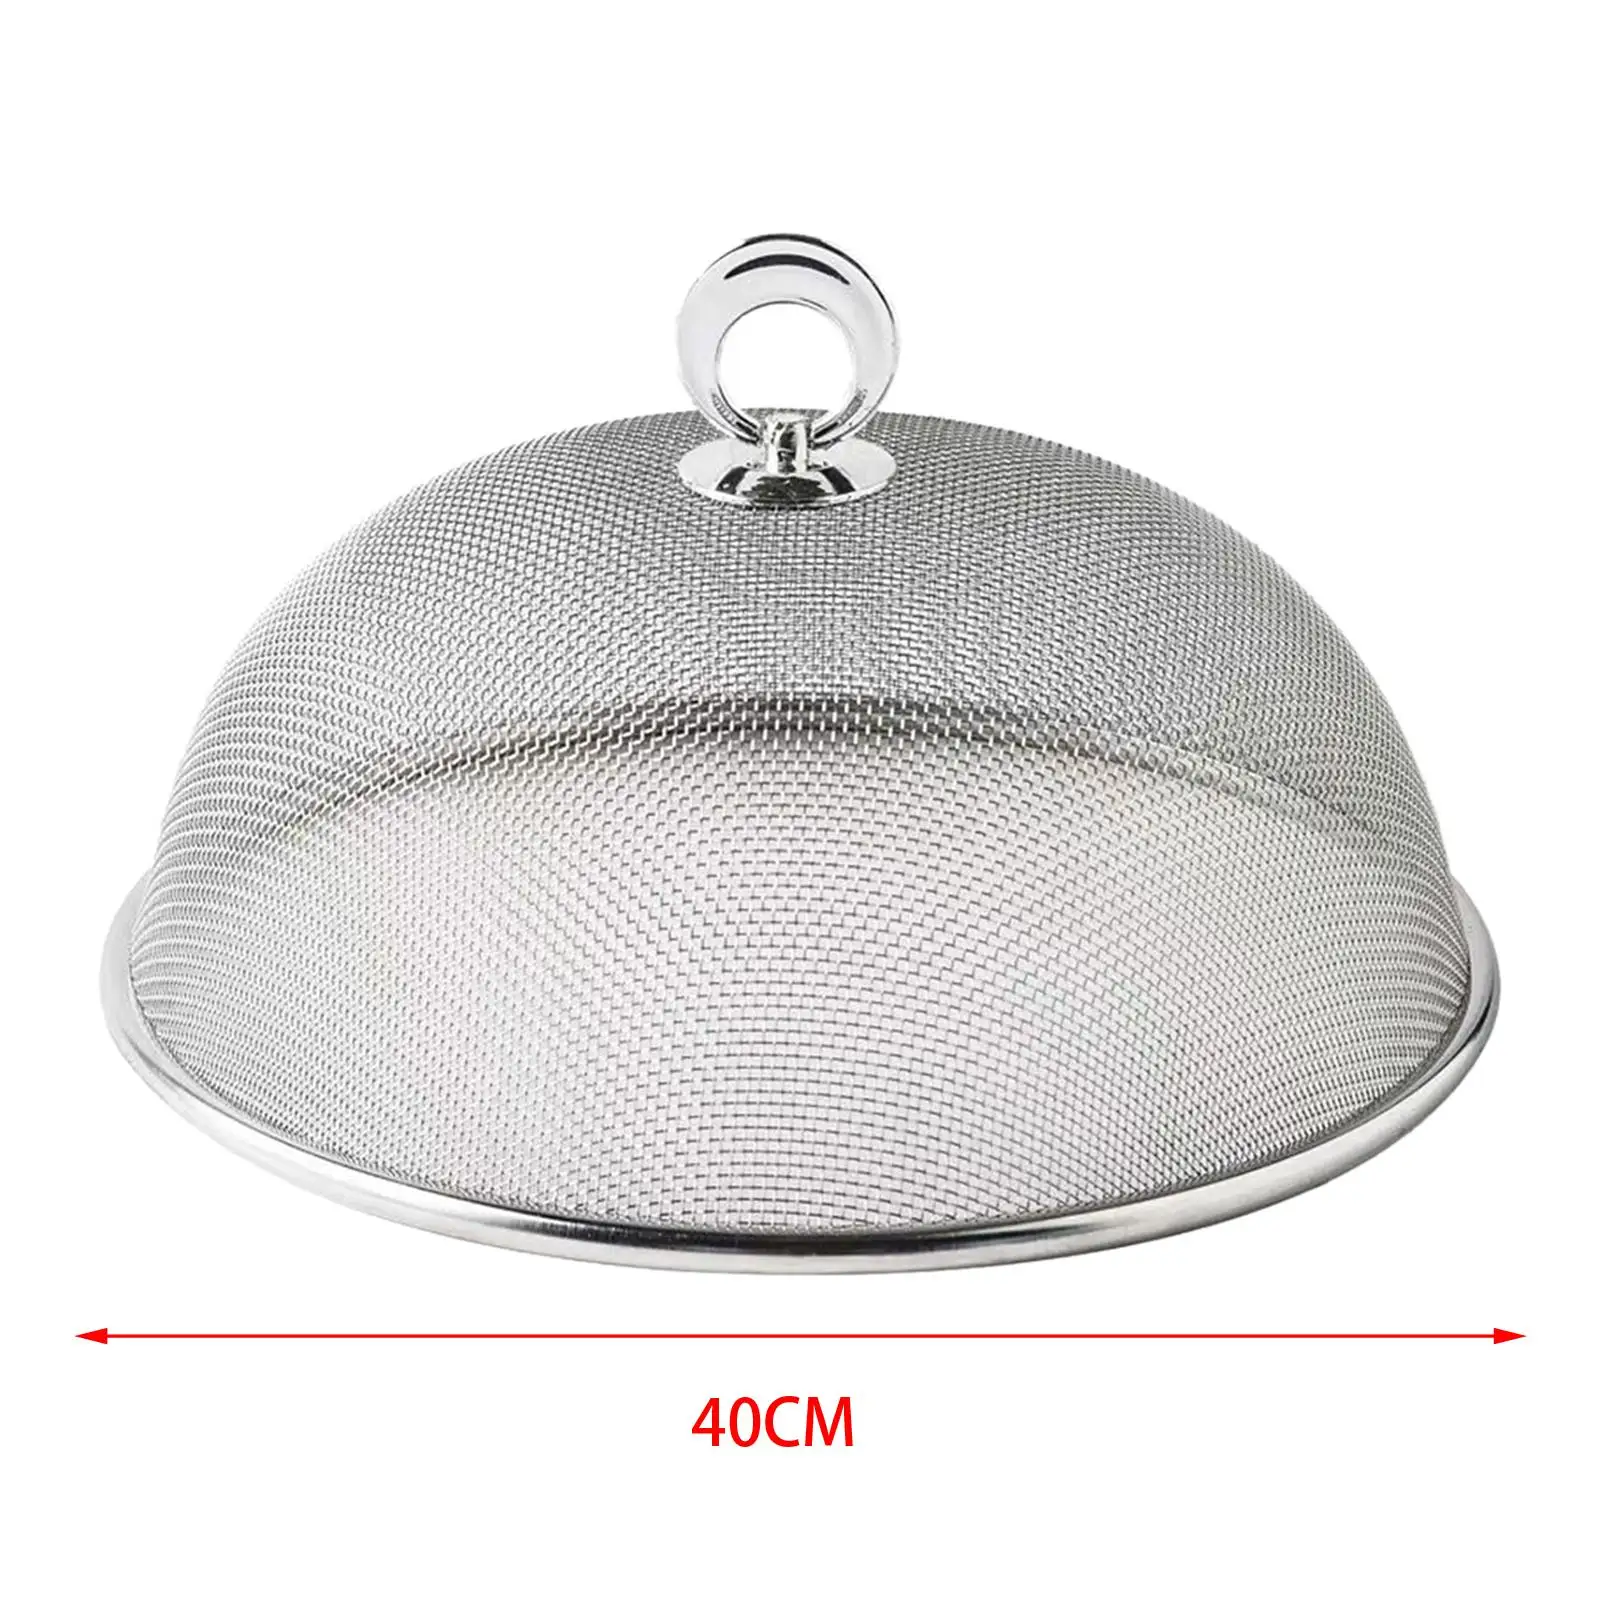 Food Serving Cover BBQ Cover Outside Durable Food Dome Lid Plate Serving Covers for BBQ Outdoor Indoor kitchen gadgets , 35cm